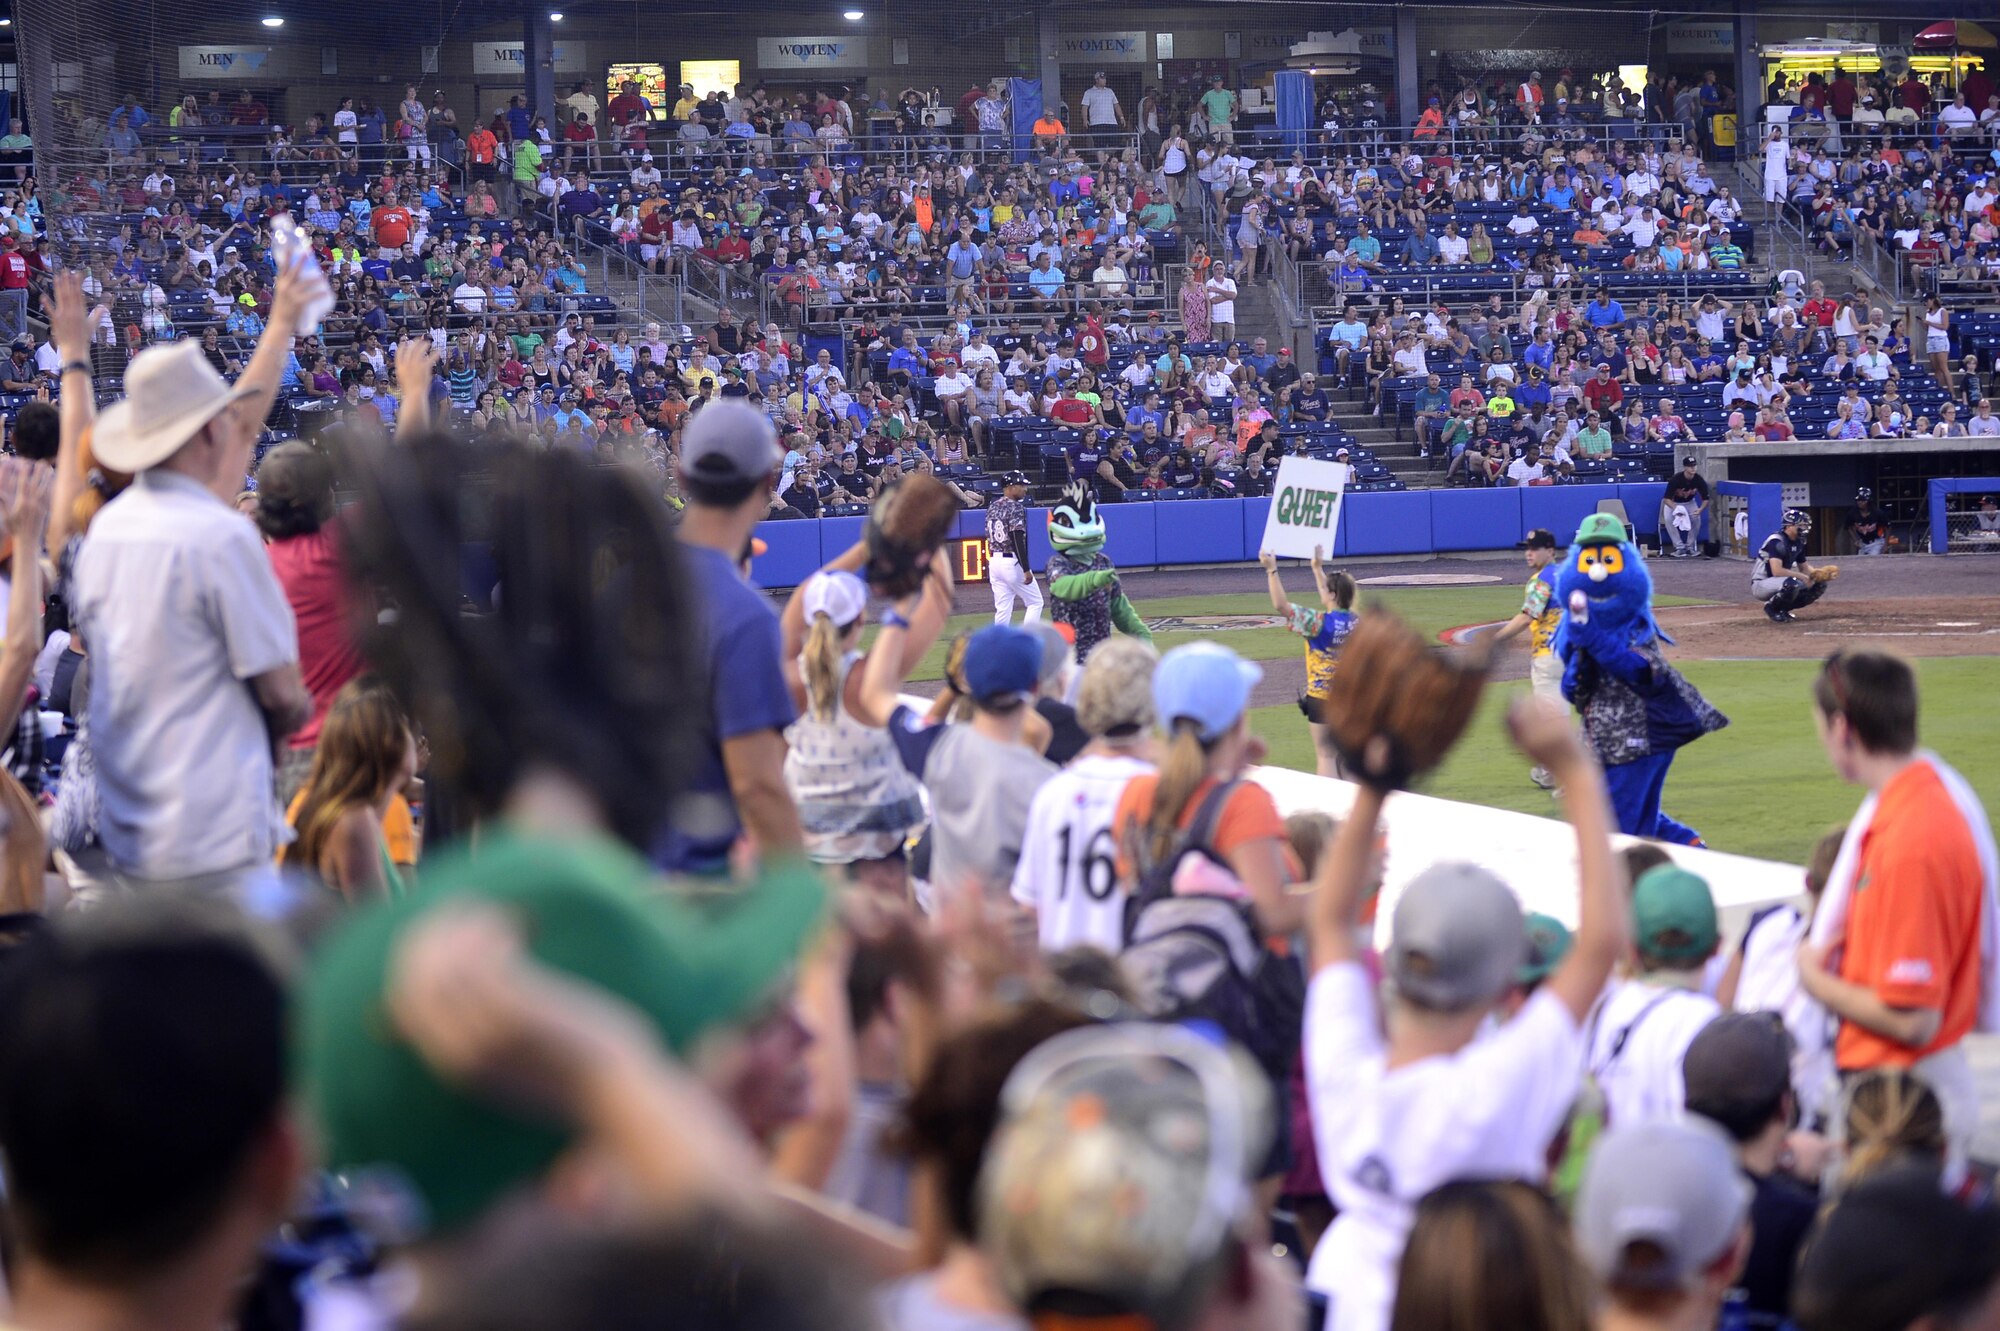 Rip Tide, Norfolk Tides mascot, shoots foam baseballs to the crowd during the Norfolk Tides Air Force Appreciation Night baseball game in Norfolk, Va., July 23, 2016. Fans participated in games between innings with the mascots and were provided with Tides memorabilia. (U.S. Air Force photo by Airman 1st Class Kaylee Dubois)